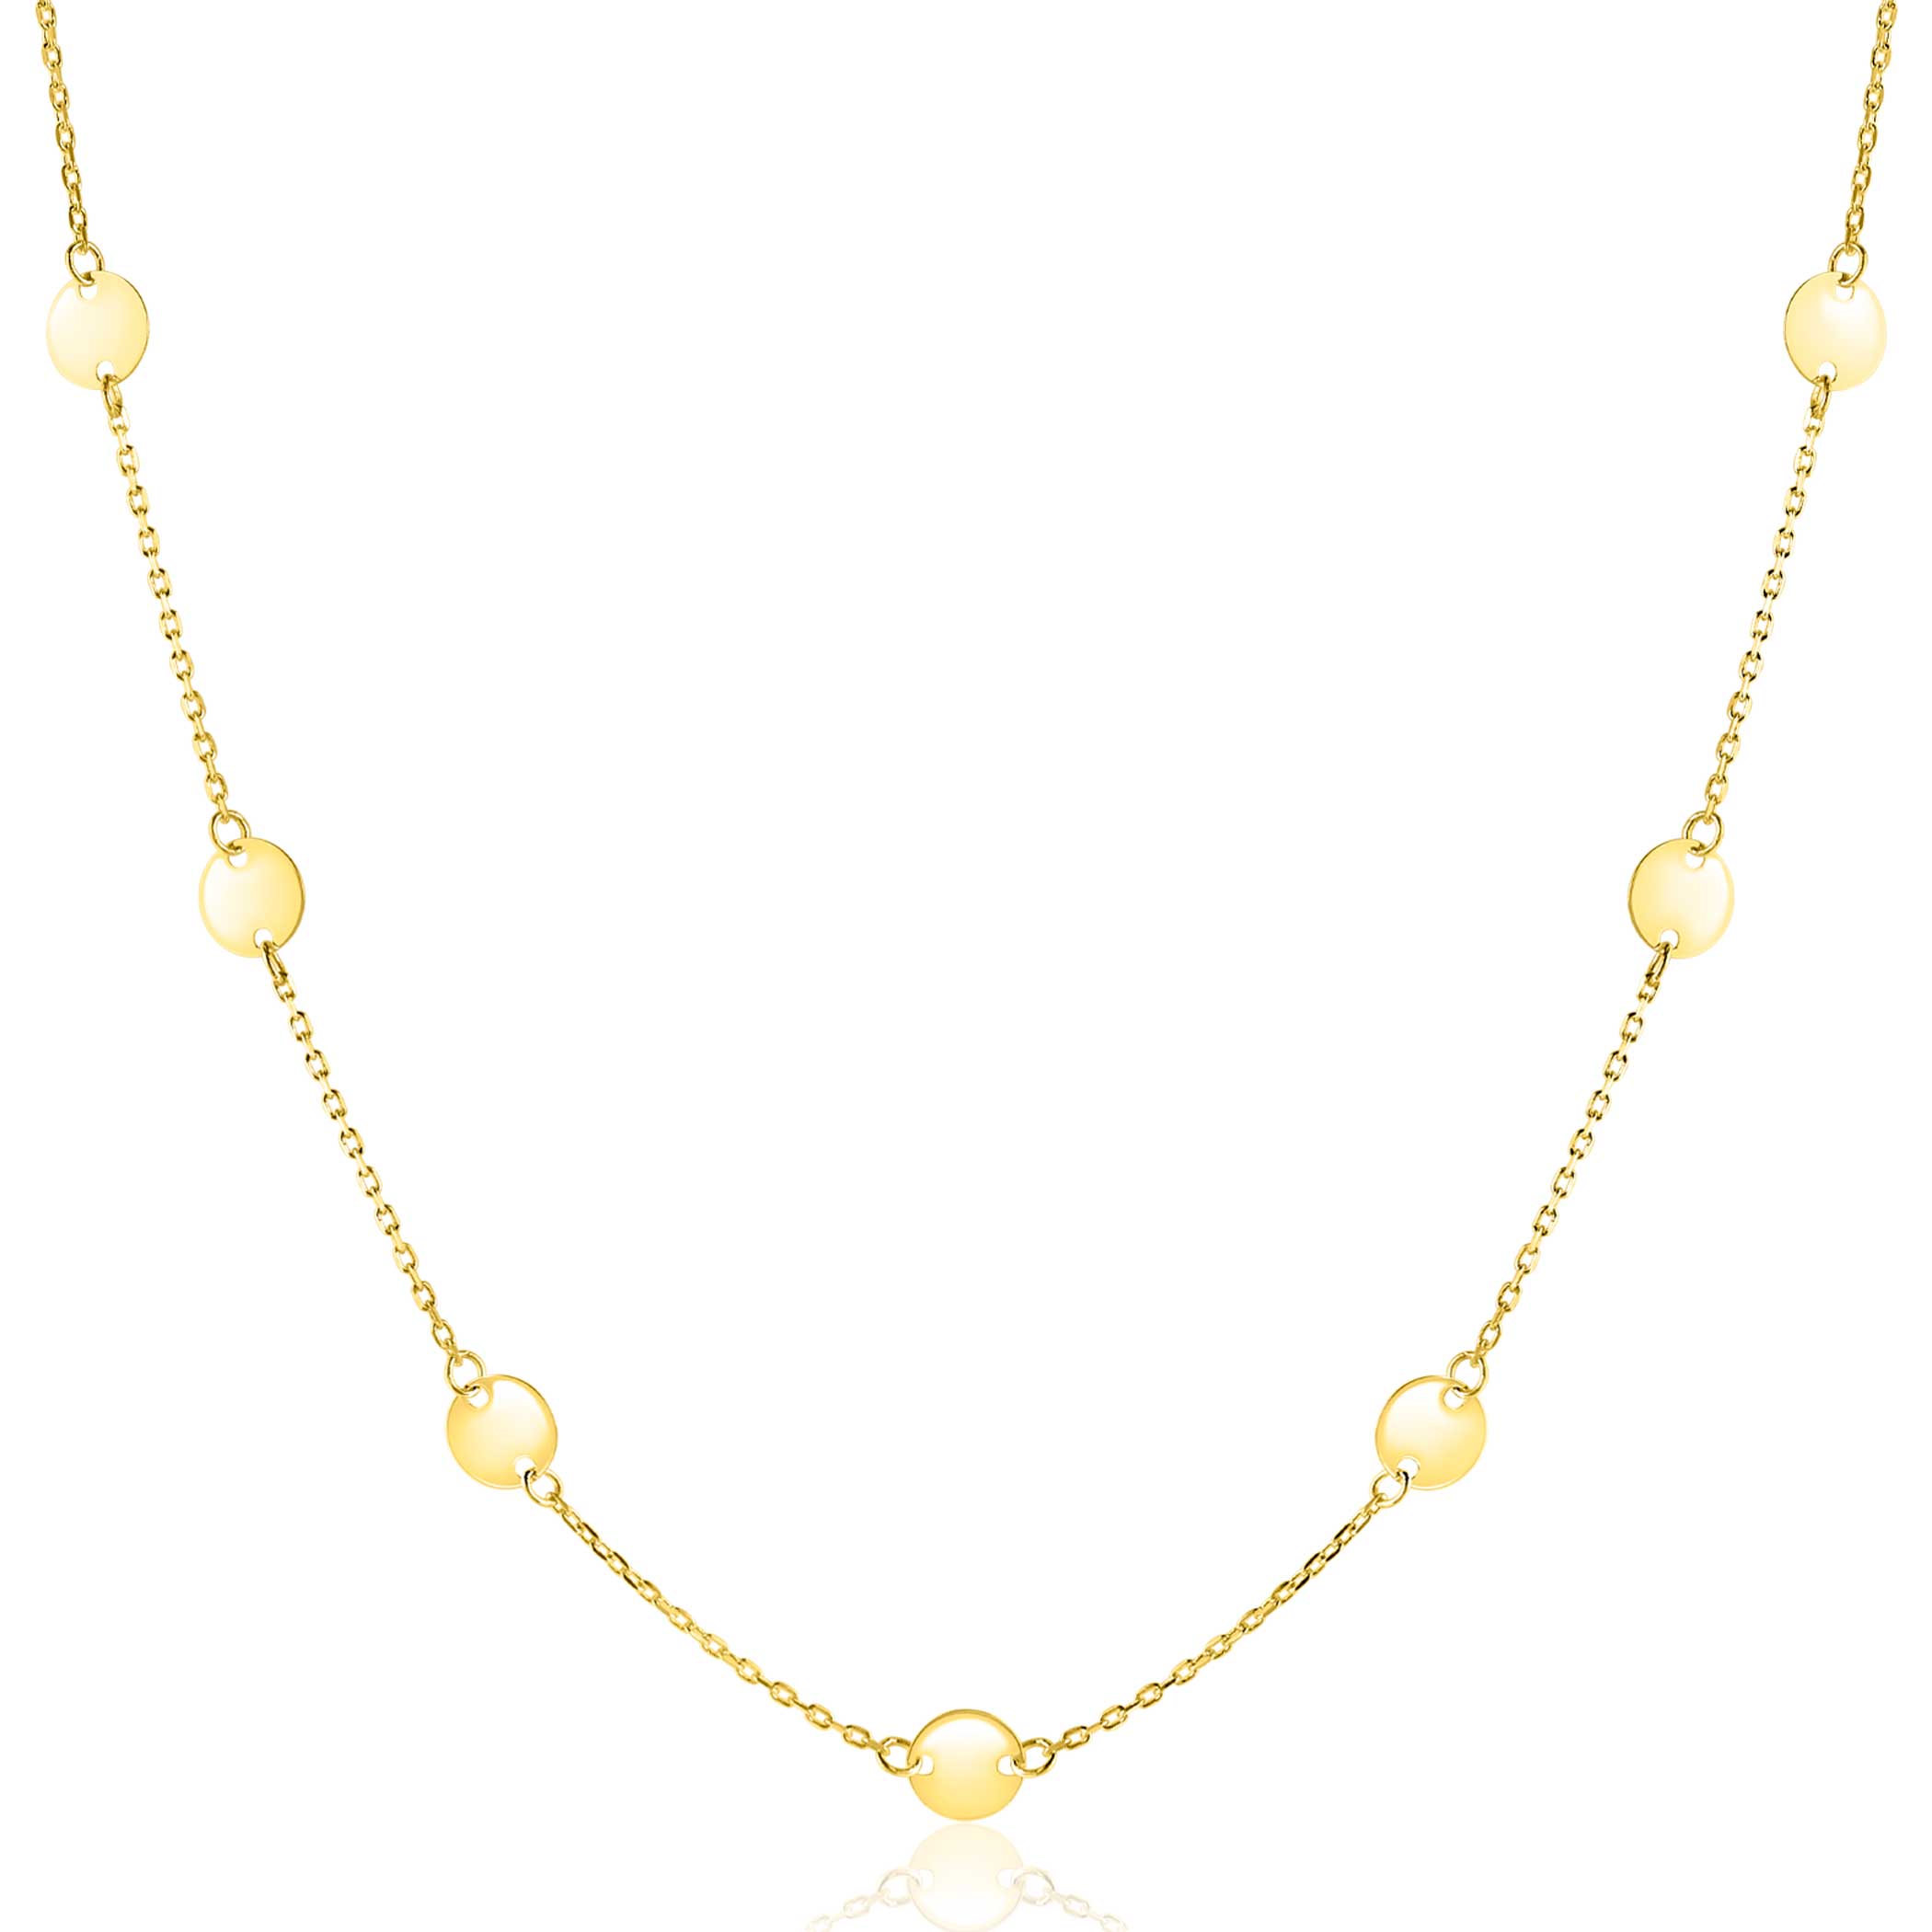 ZINZI Gold 14 carat gold necklace with delicate jasseron links and nine round smooth plates, 5mm wide, 42-45cm ZGC503
